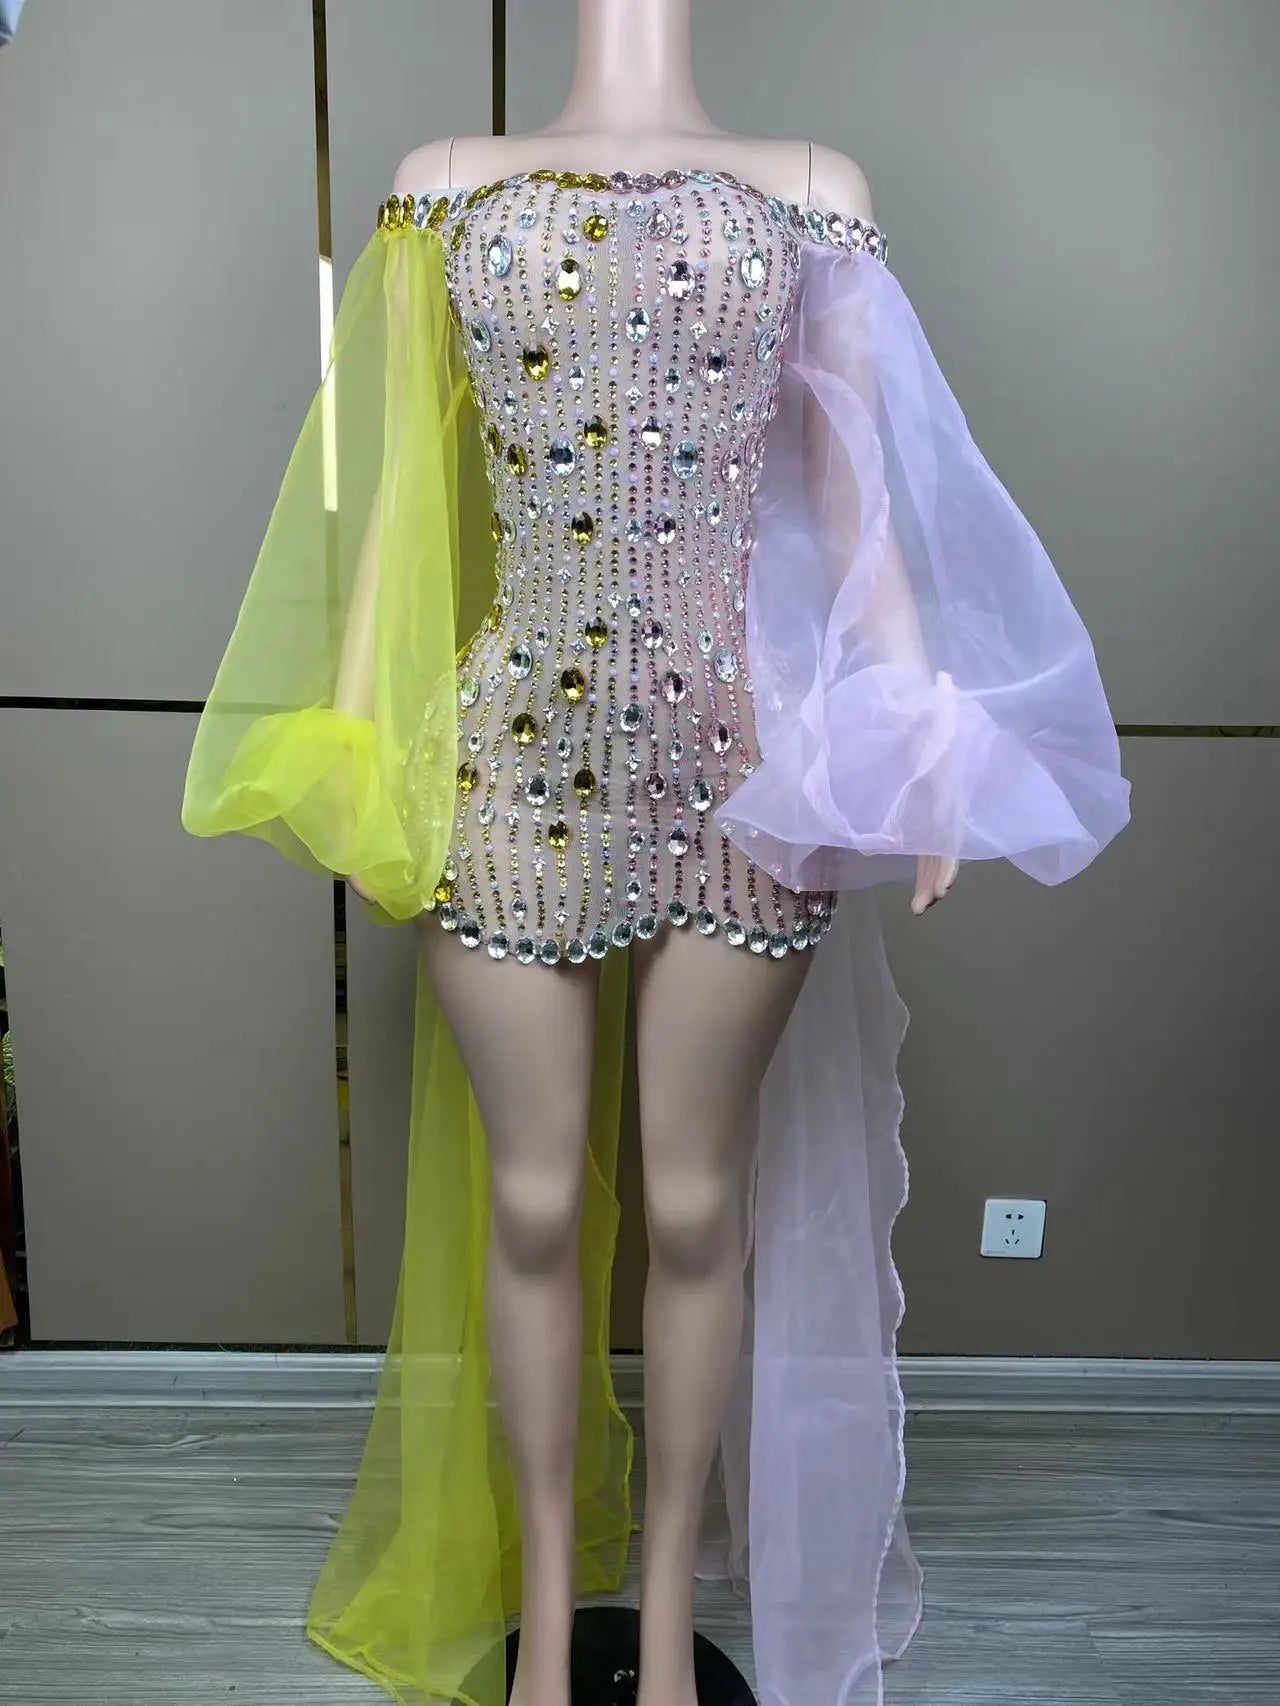 Sexy Stage Evening Colorful Crystals Transparent Dress Birthday Celebrate Sexy Outfit Prom Wedding Photoshoot Dress